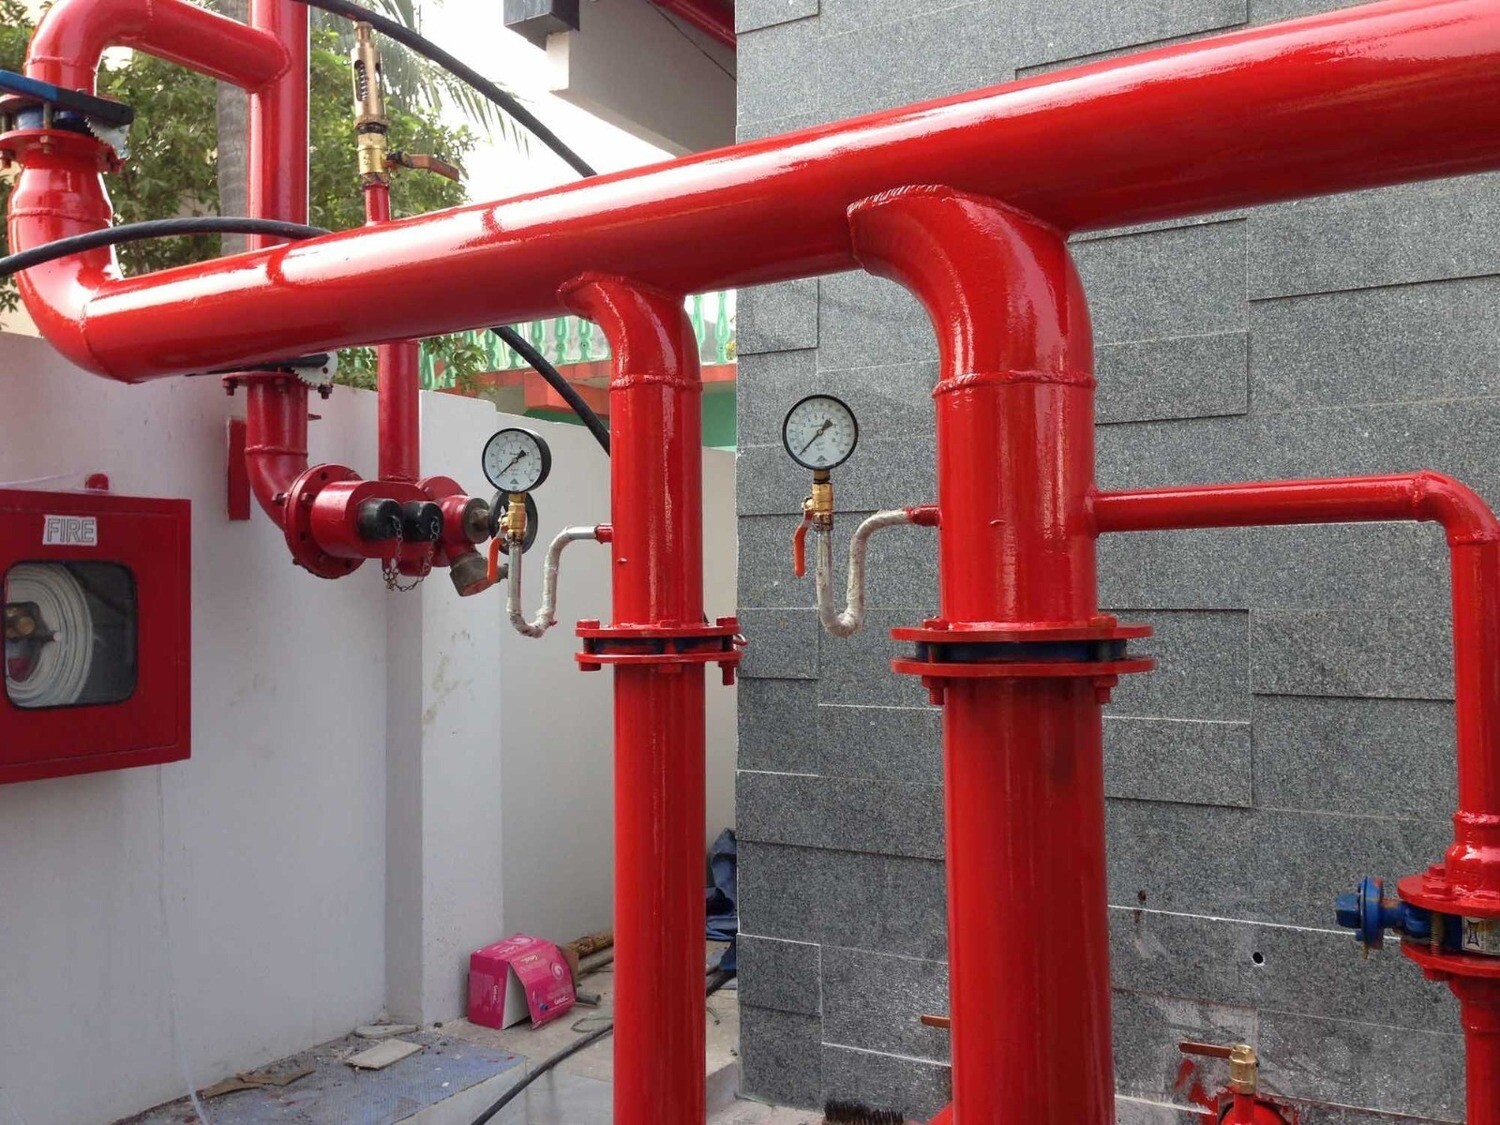 Periodic inspection and preventive maintenance of fire hydrants/reel hoses/vvf connection